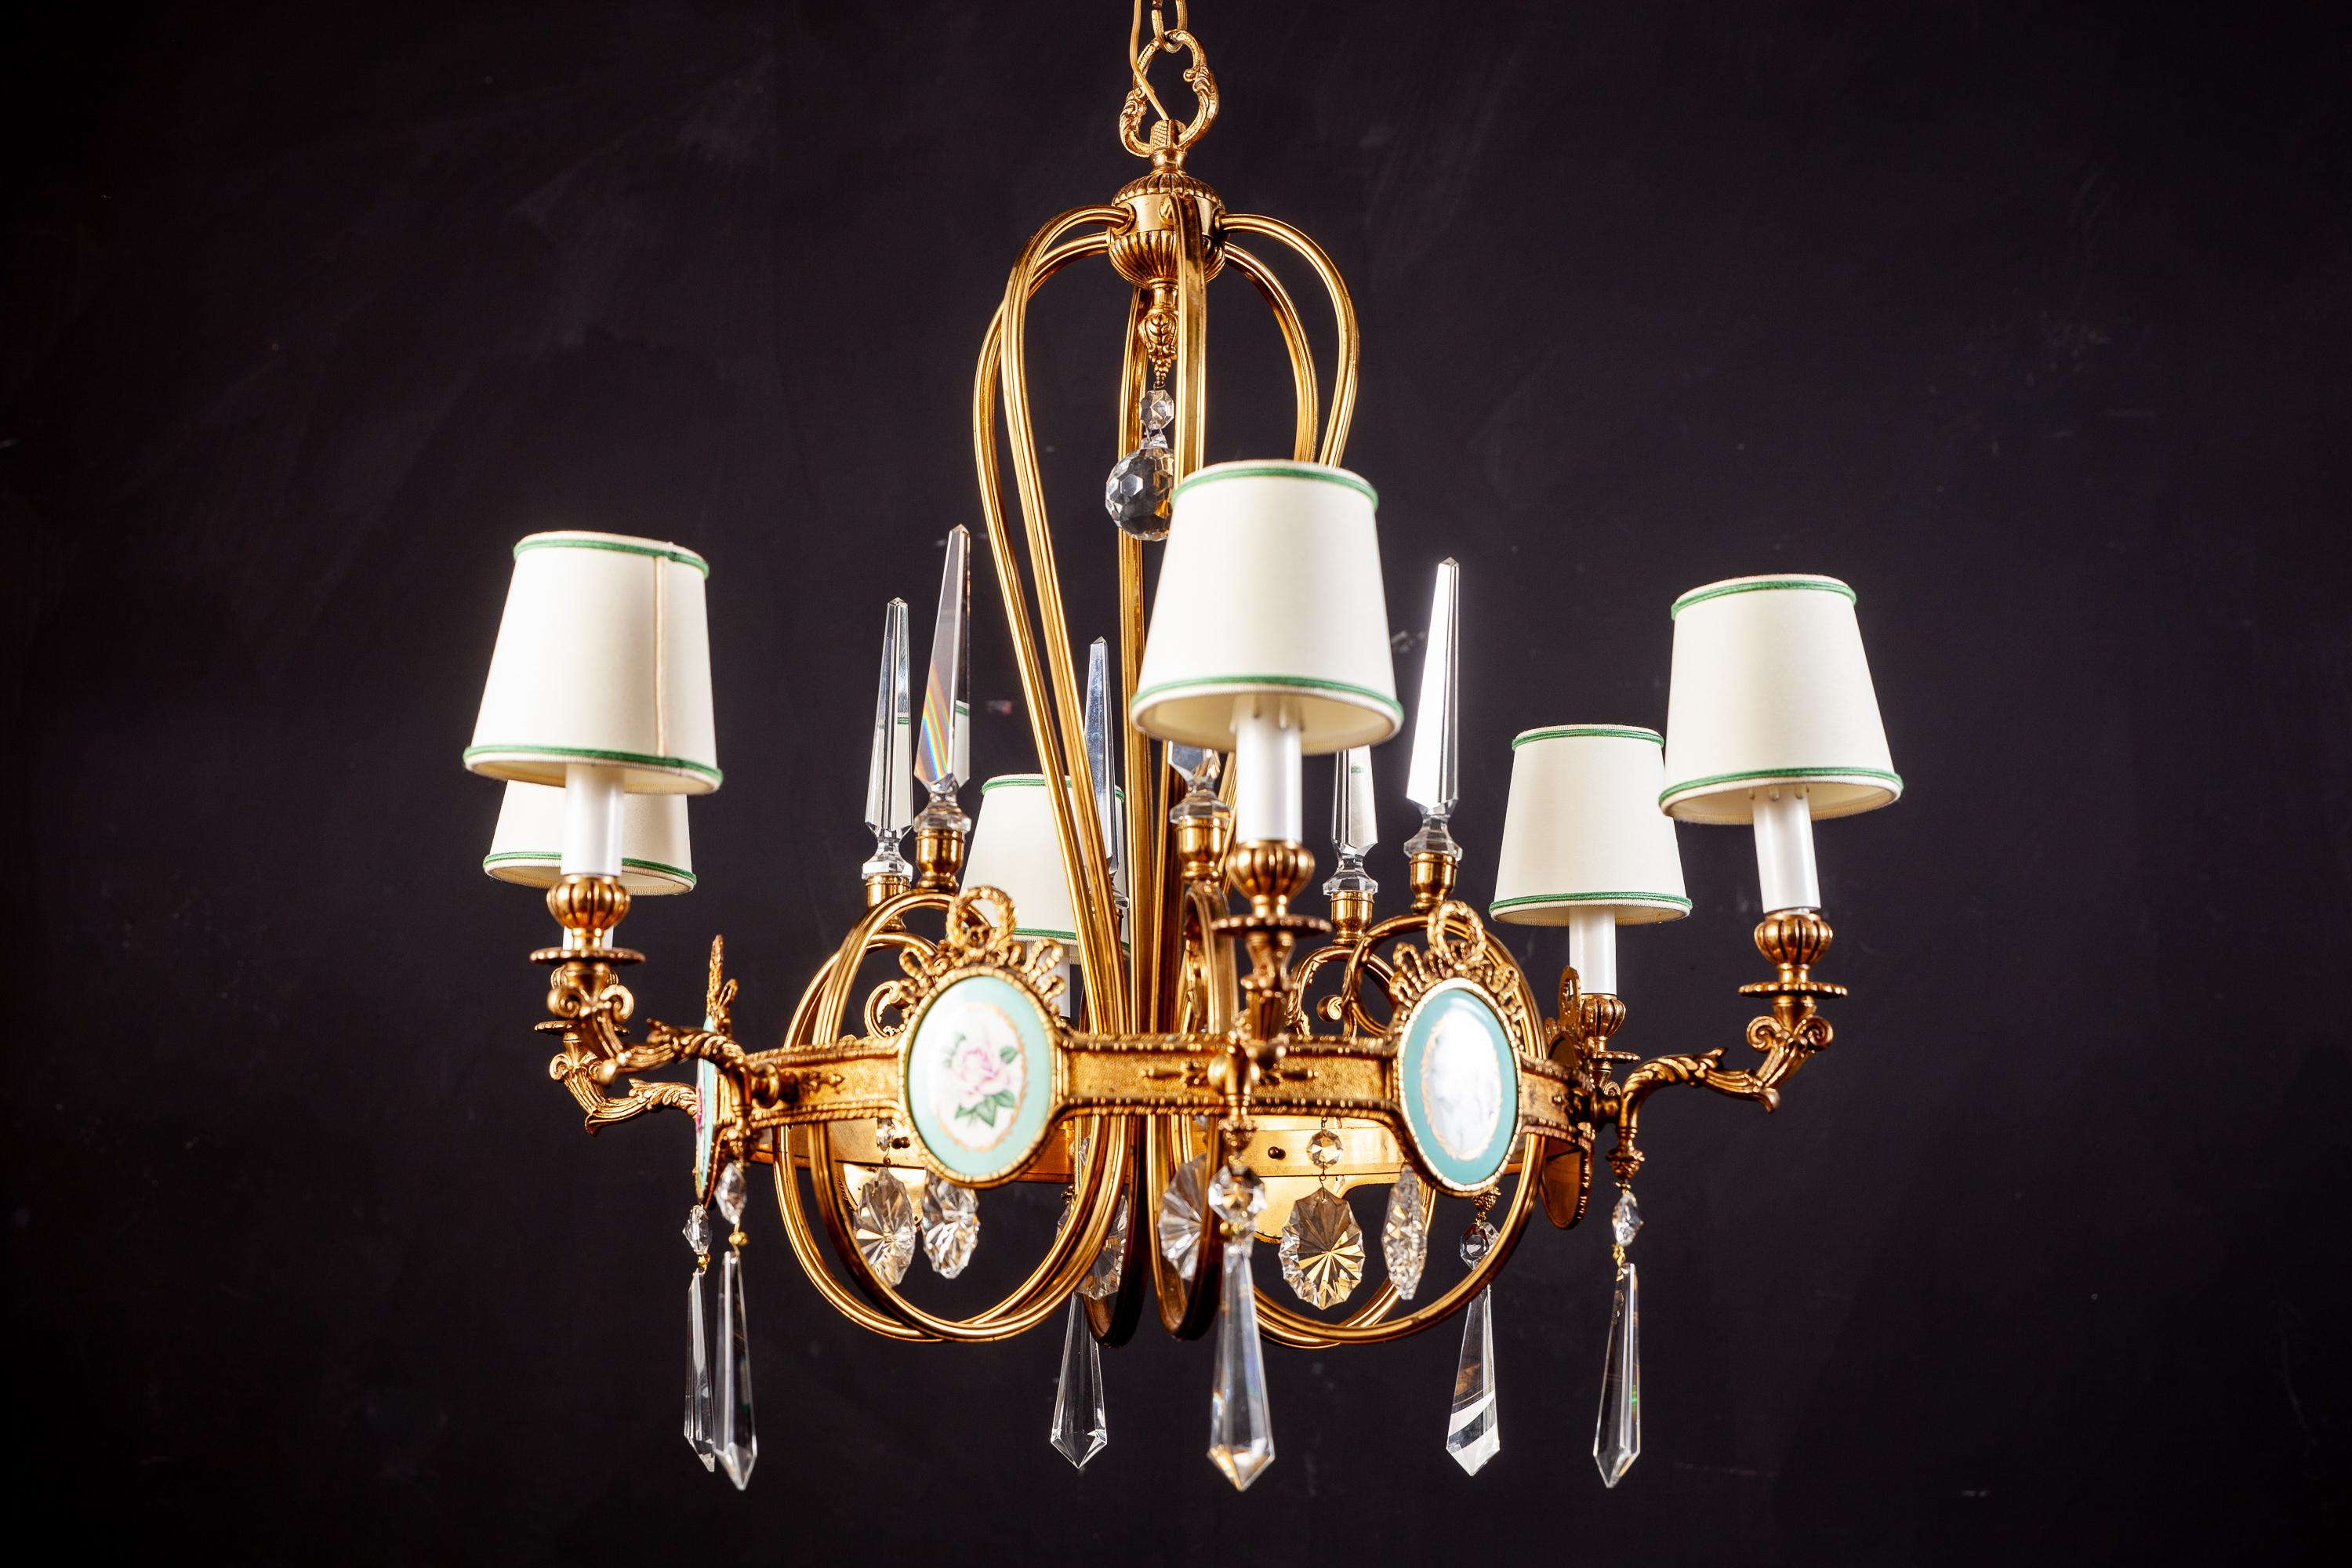 Mid-20th Century Art Deco Italian Brass Chandelier with Charming Porcelain Insert, 1940 For Sale